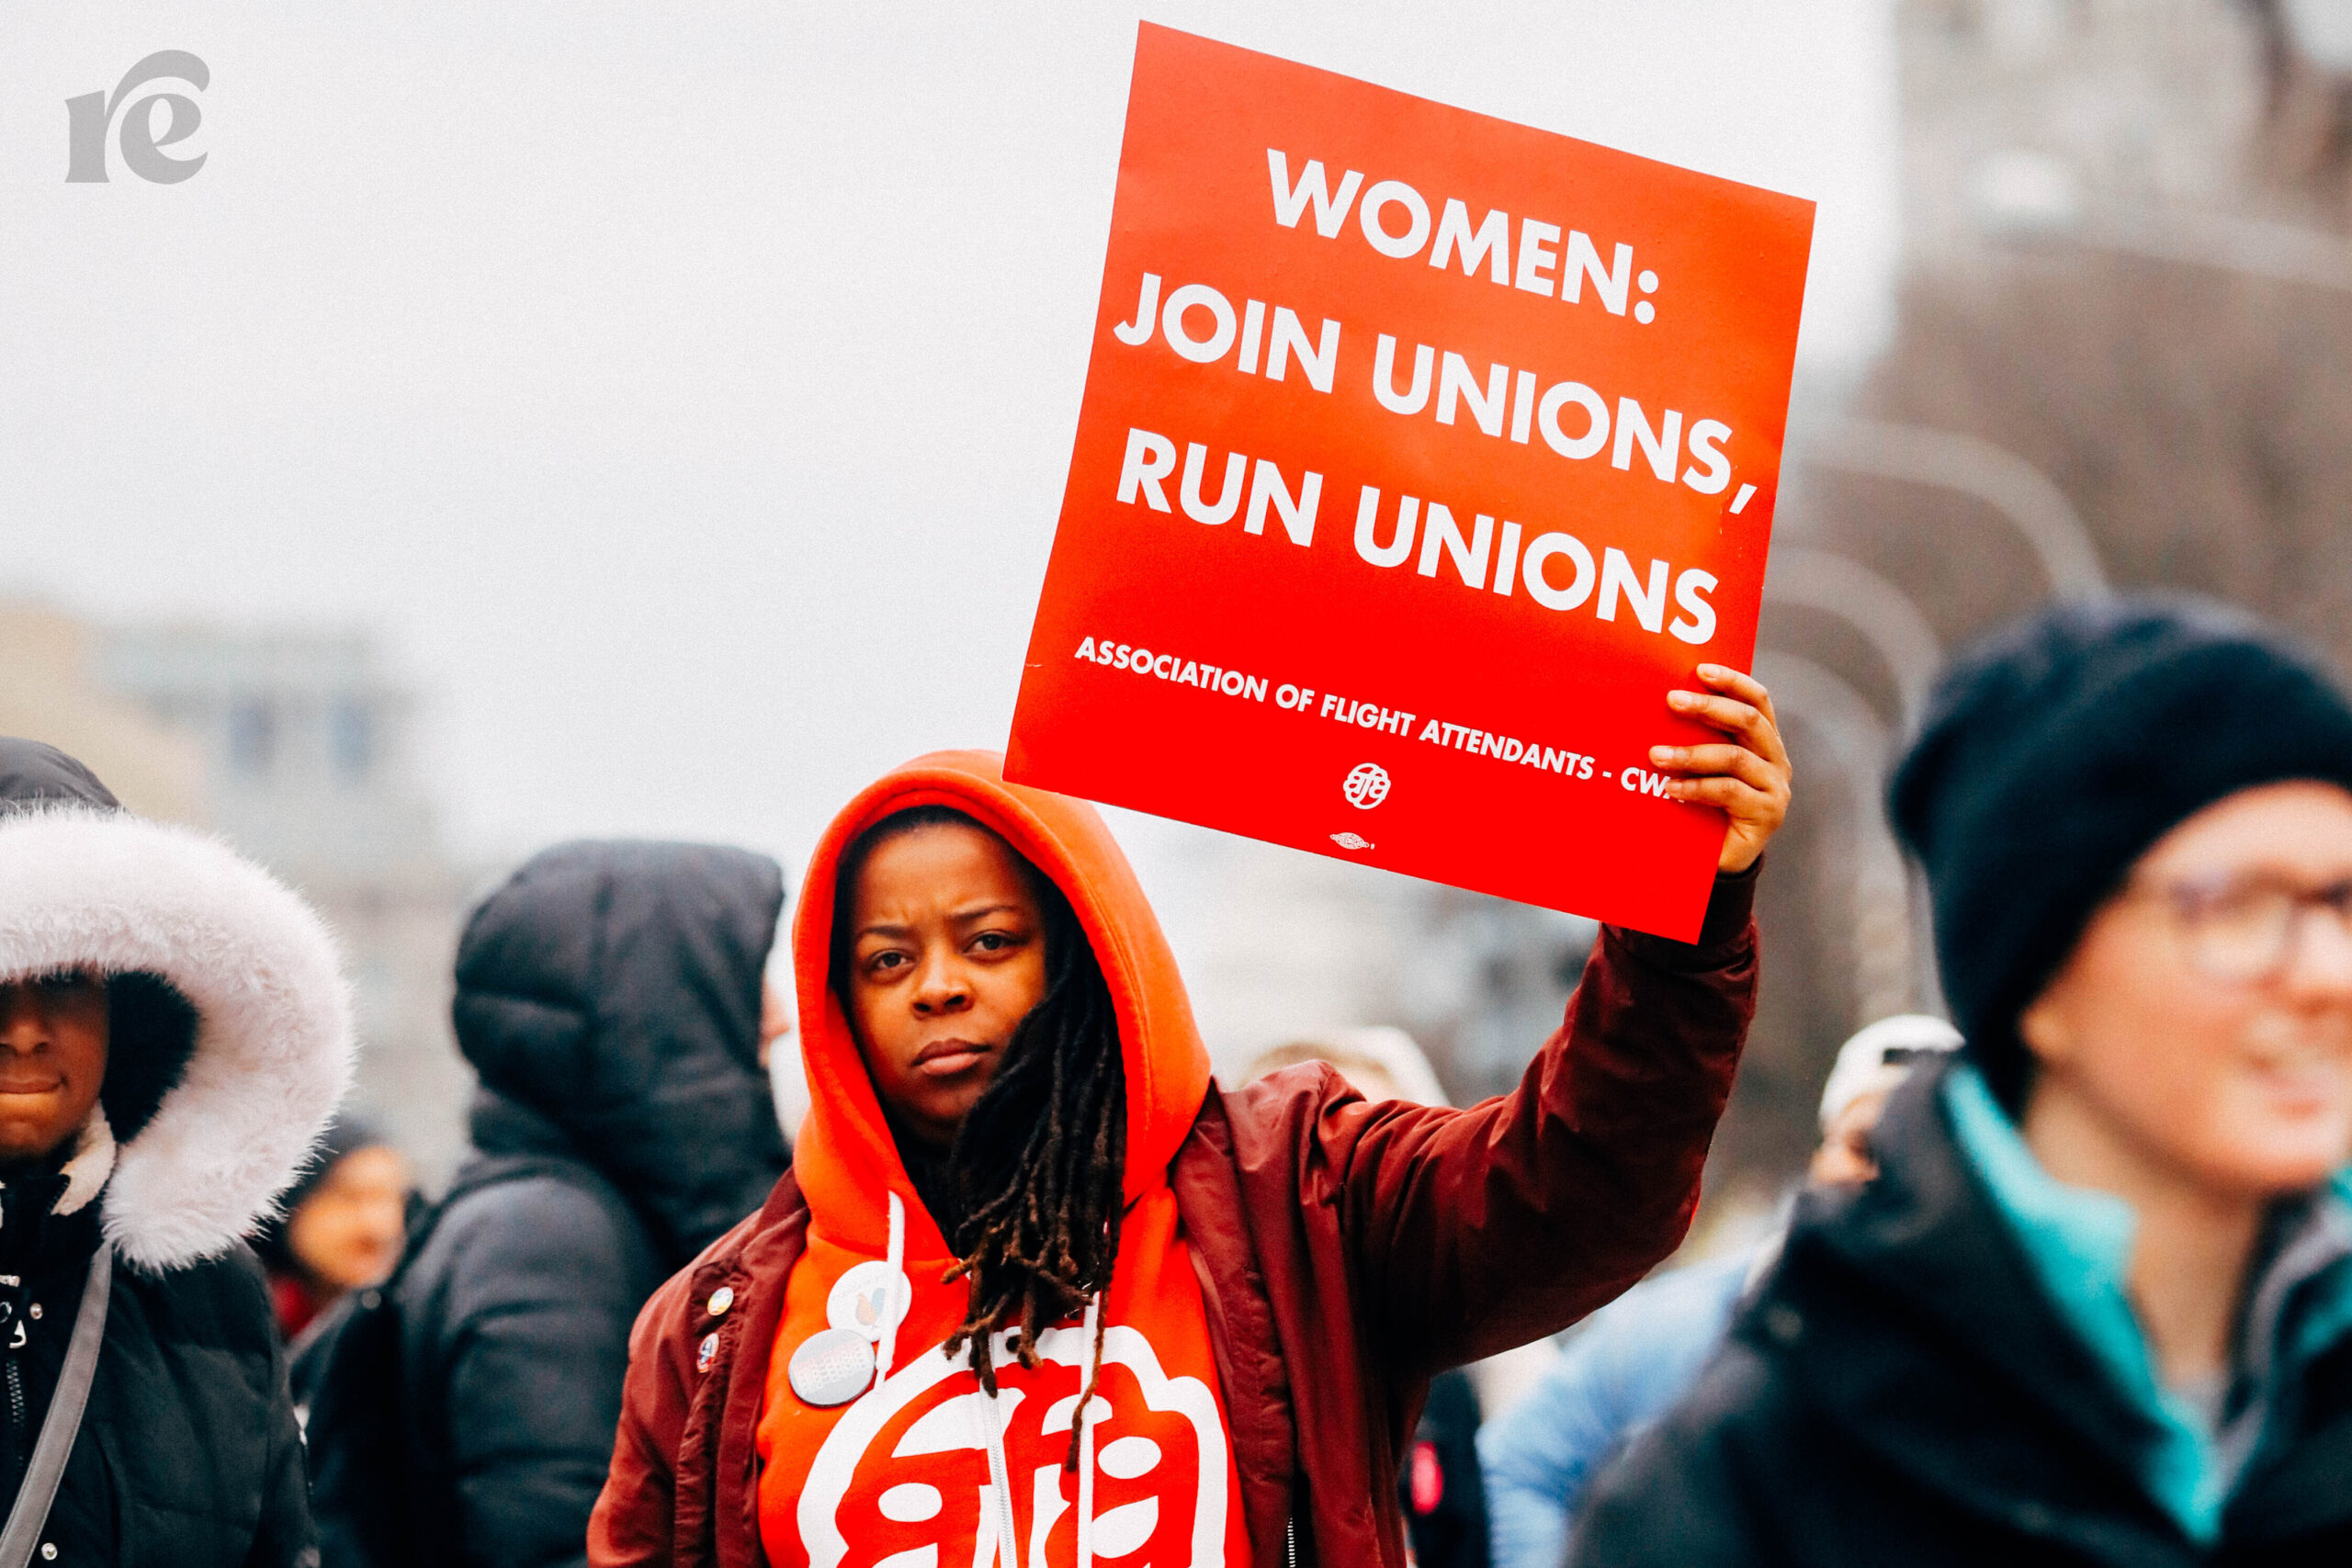 Black woman in red sweatshirt holds red sign that reads Women: Join Unions, Run Unions